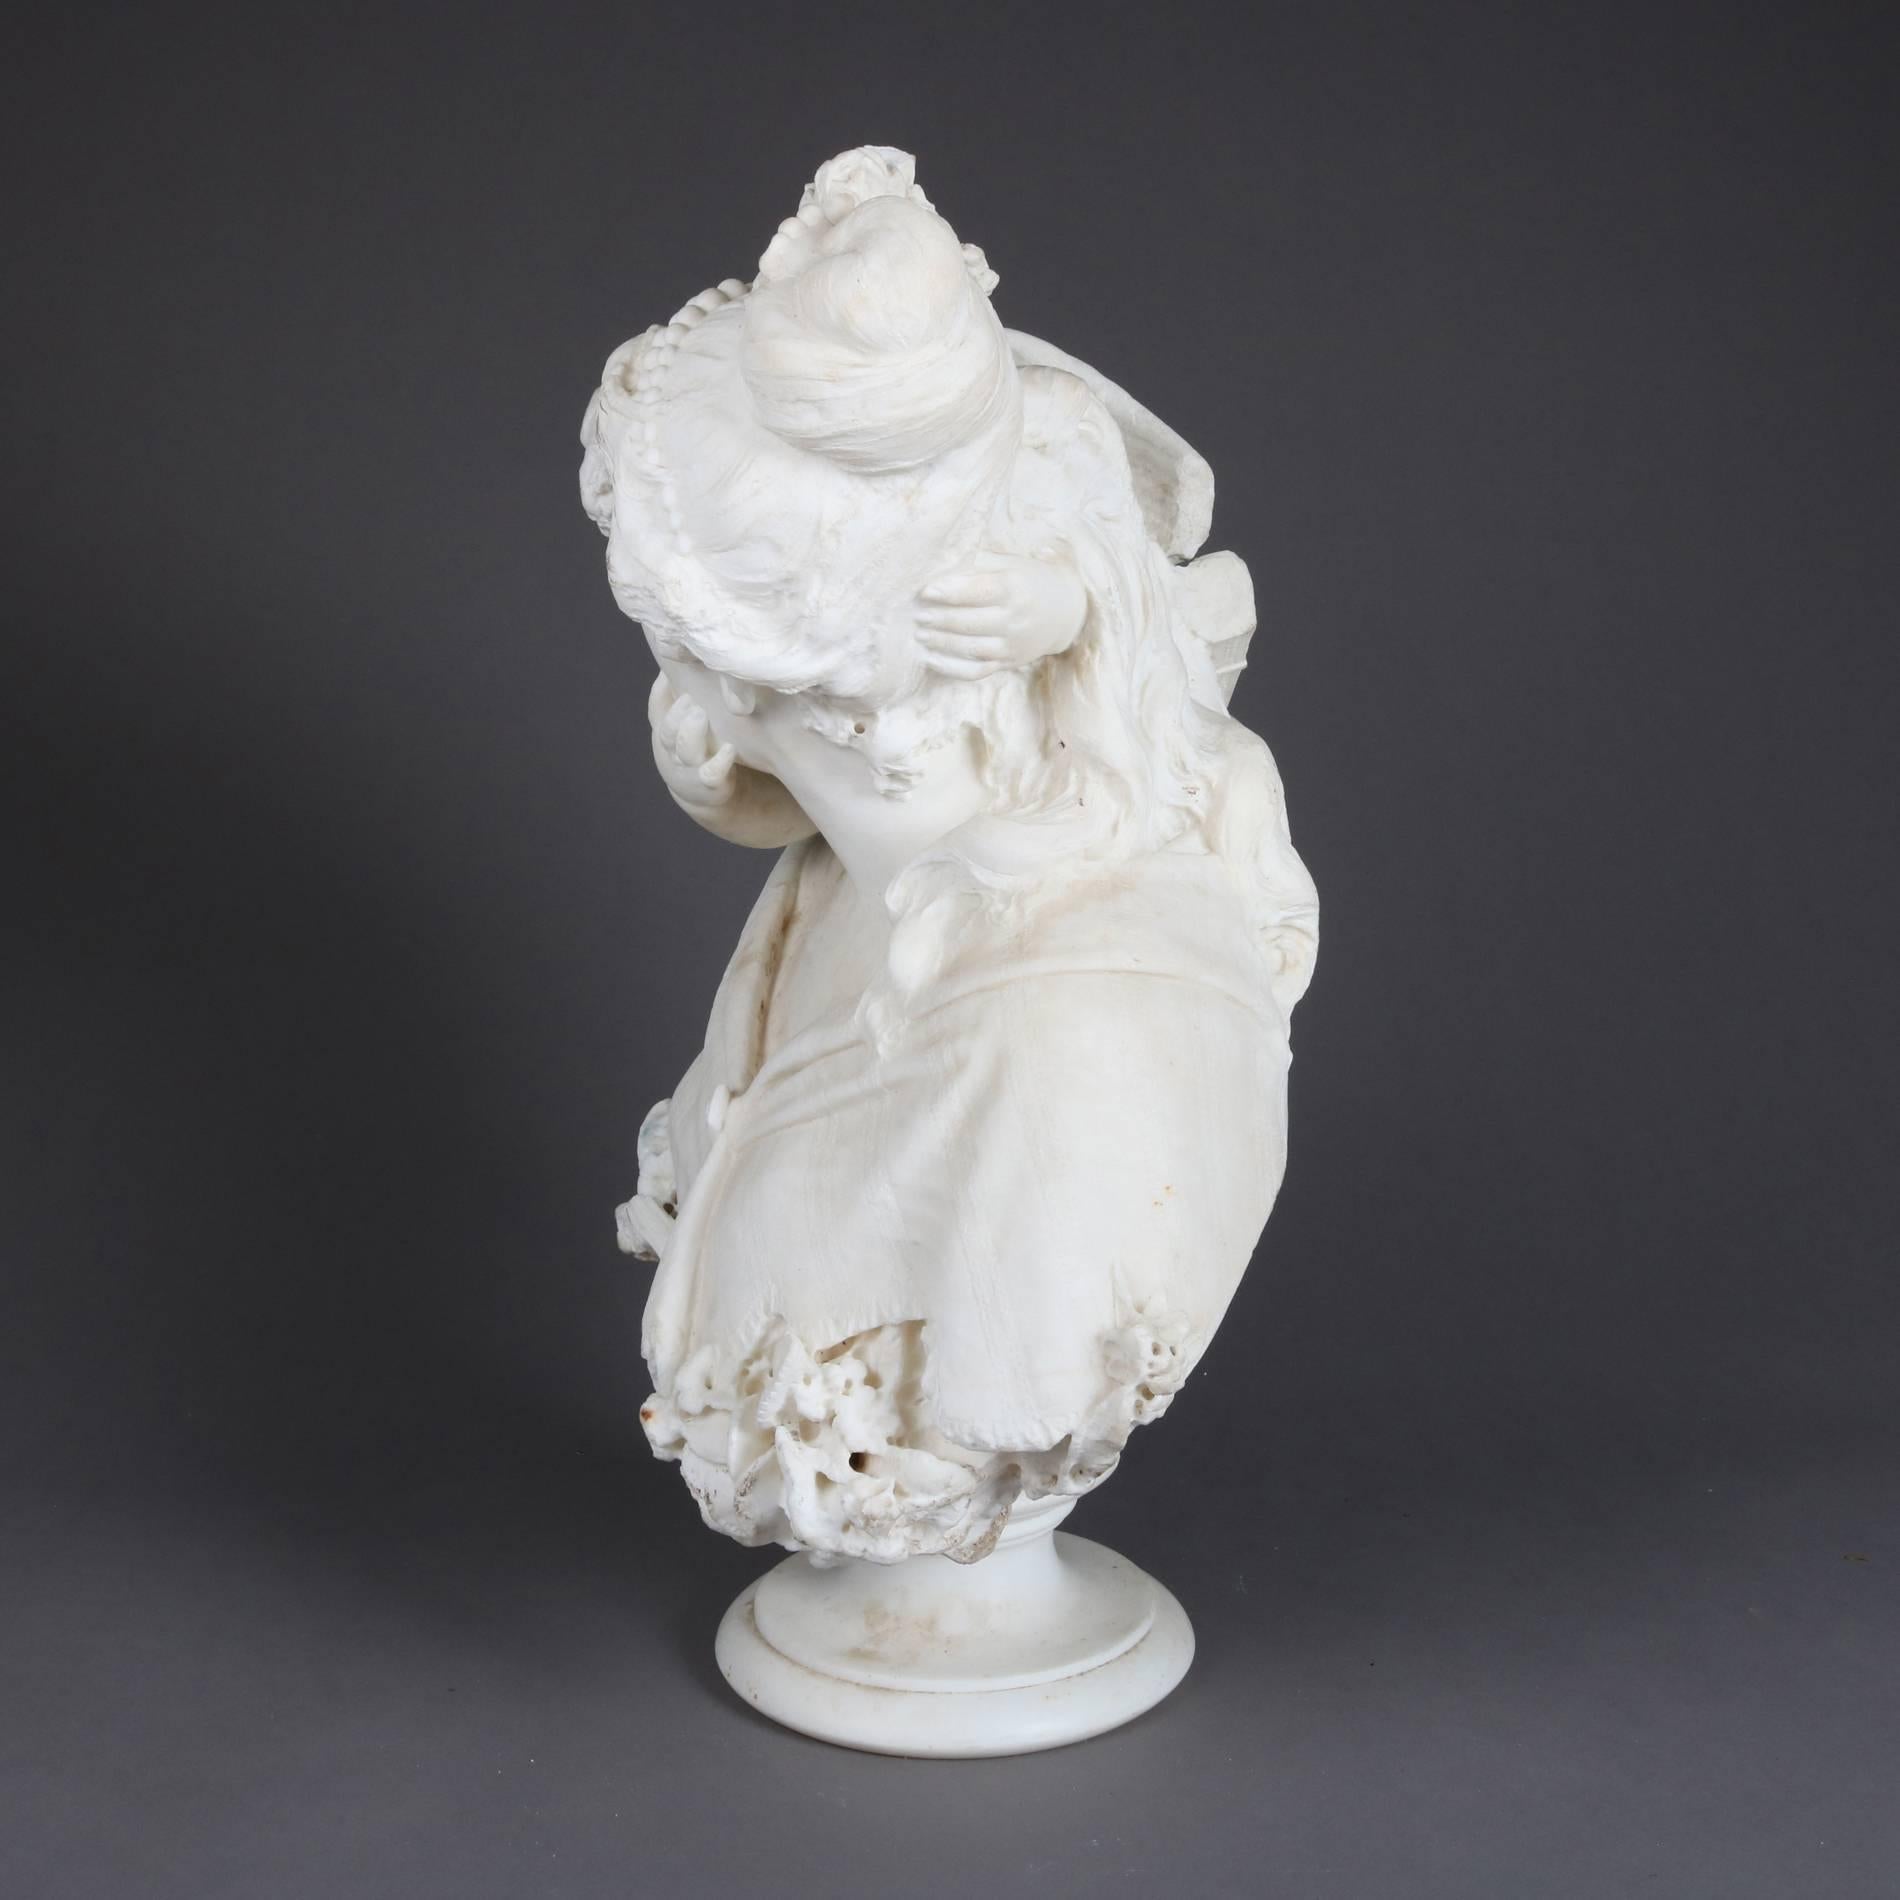 19th Century Oversized Antique Carved Alabaster Bust of Classical Cupid & Psyche